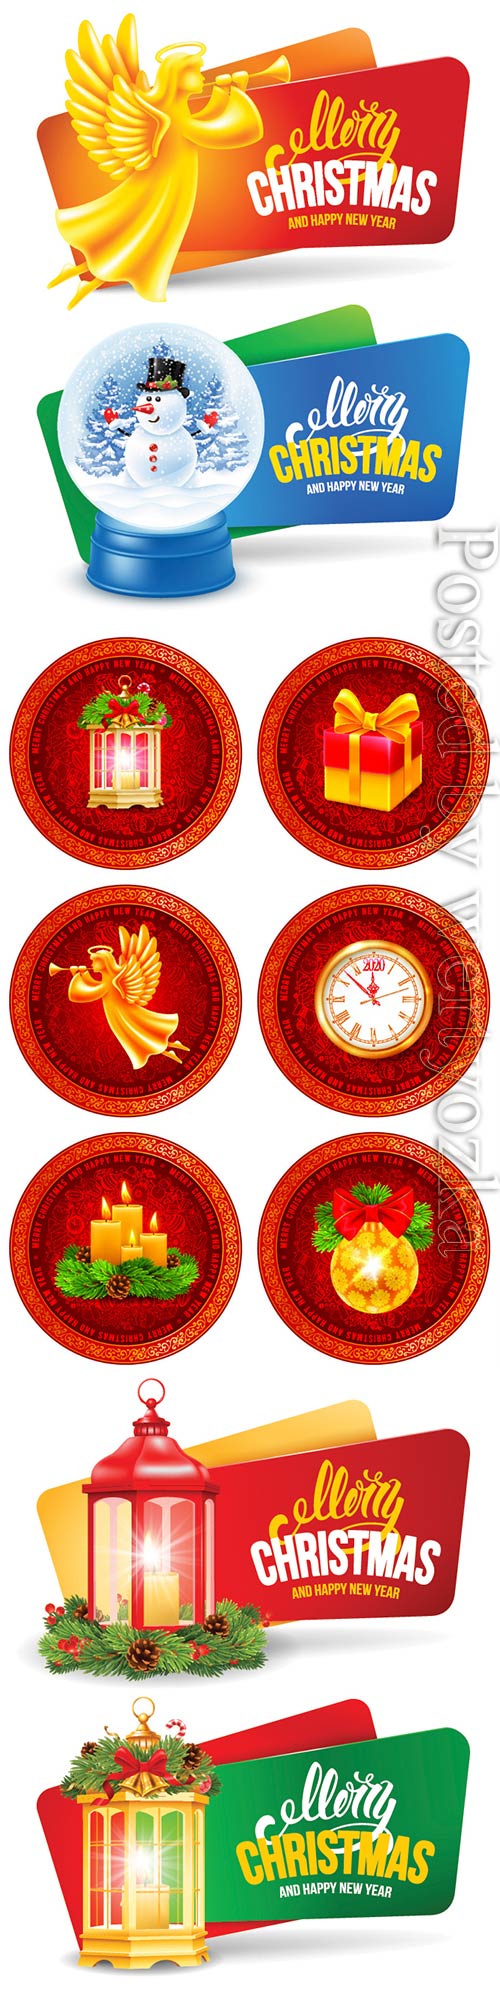 Christmas and New Year elements in vector